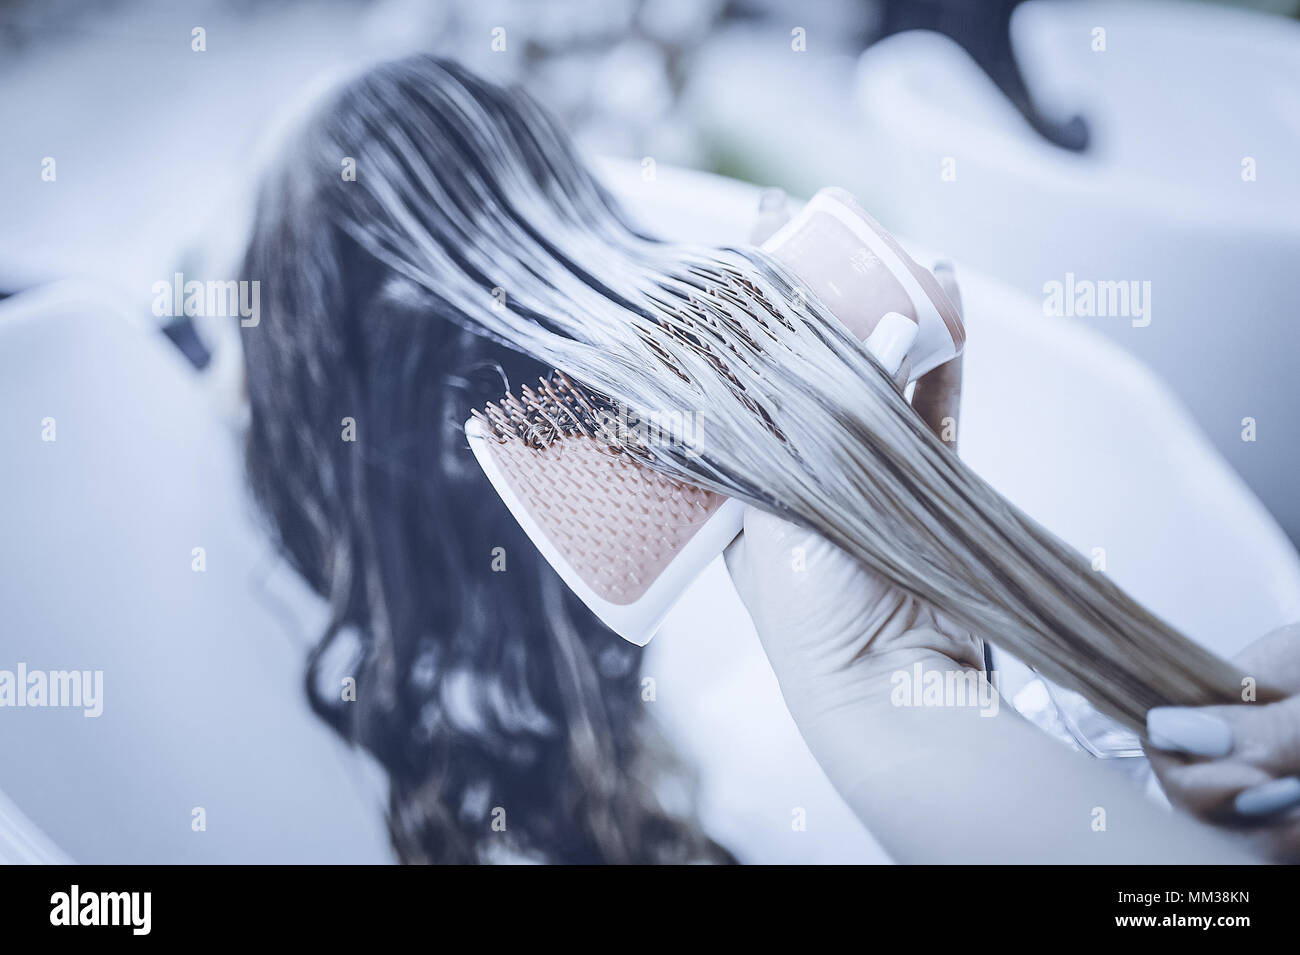 girl in a beauty salon. wash your hair, hair care, health. Toned image. Combing of washed hair with a special comb in the hairdresser's. Stock Photo